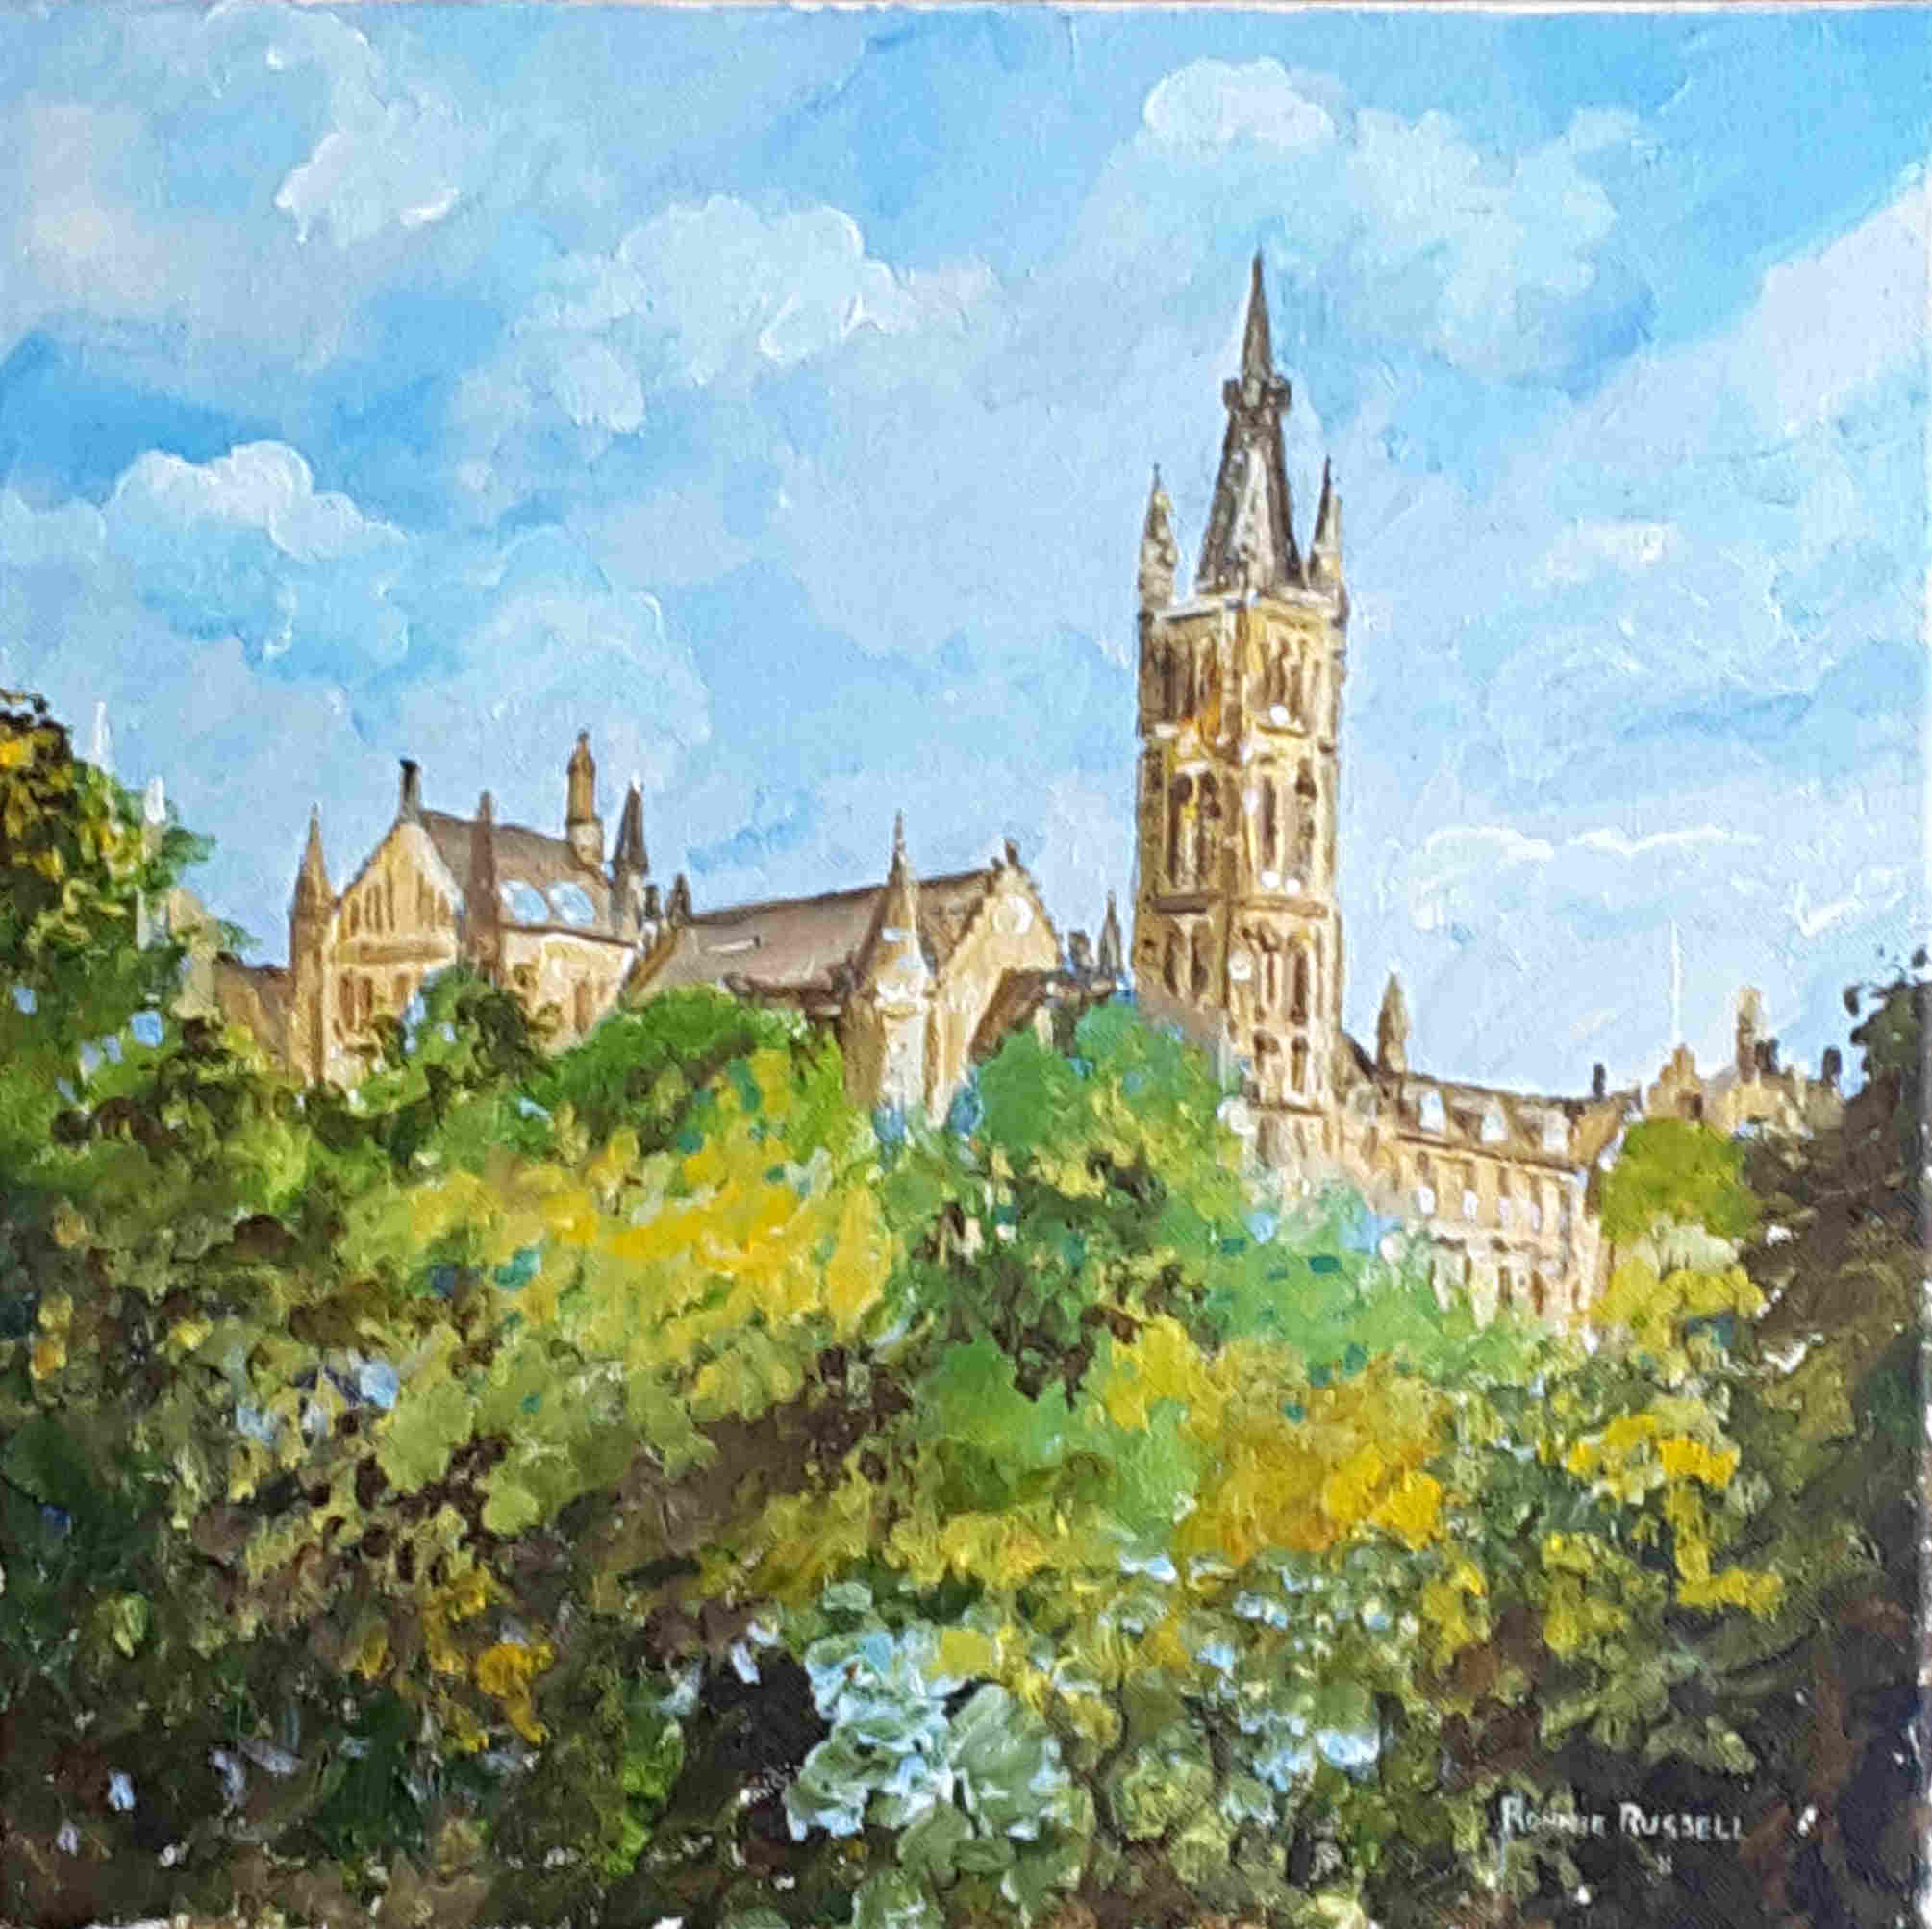 'Glasgow University' by artist Ronnie Russell